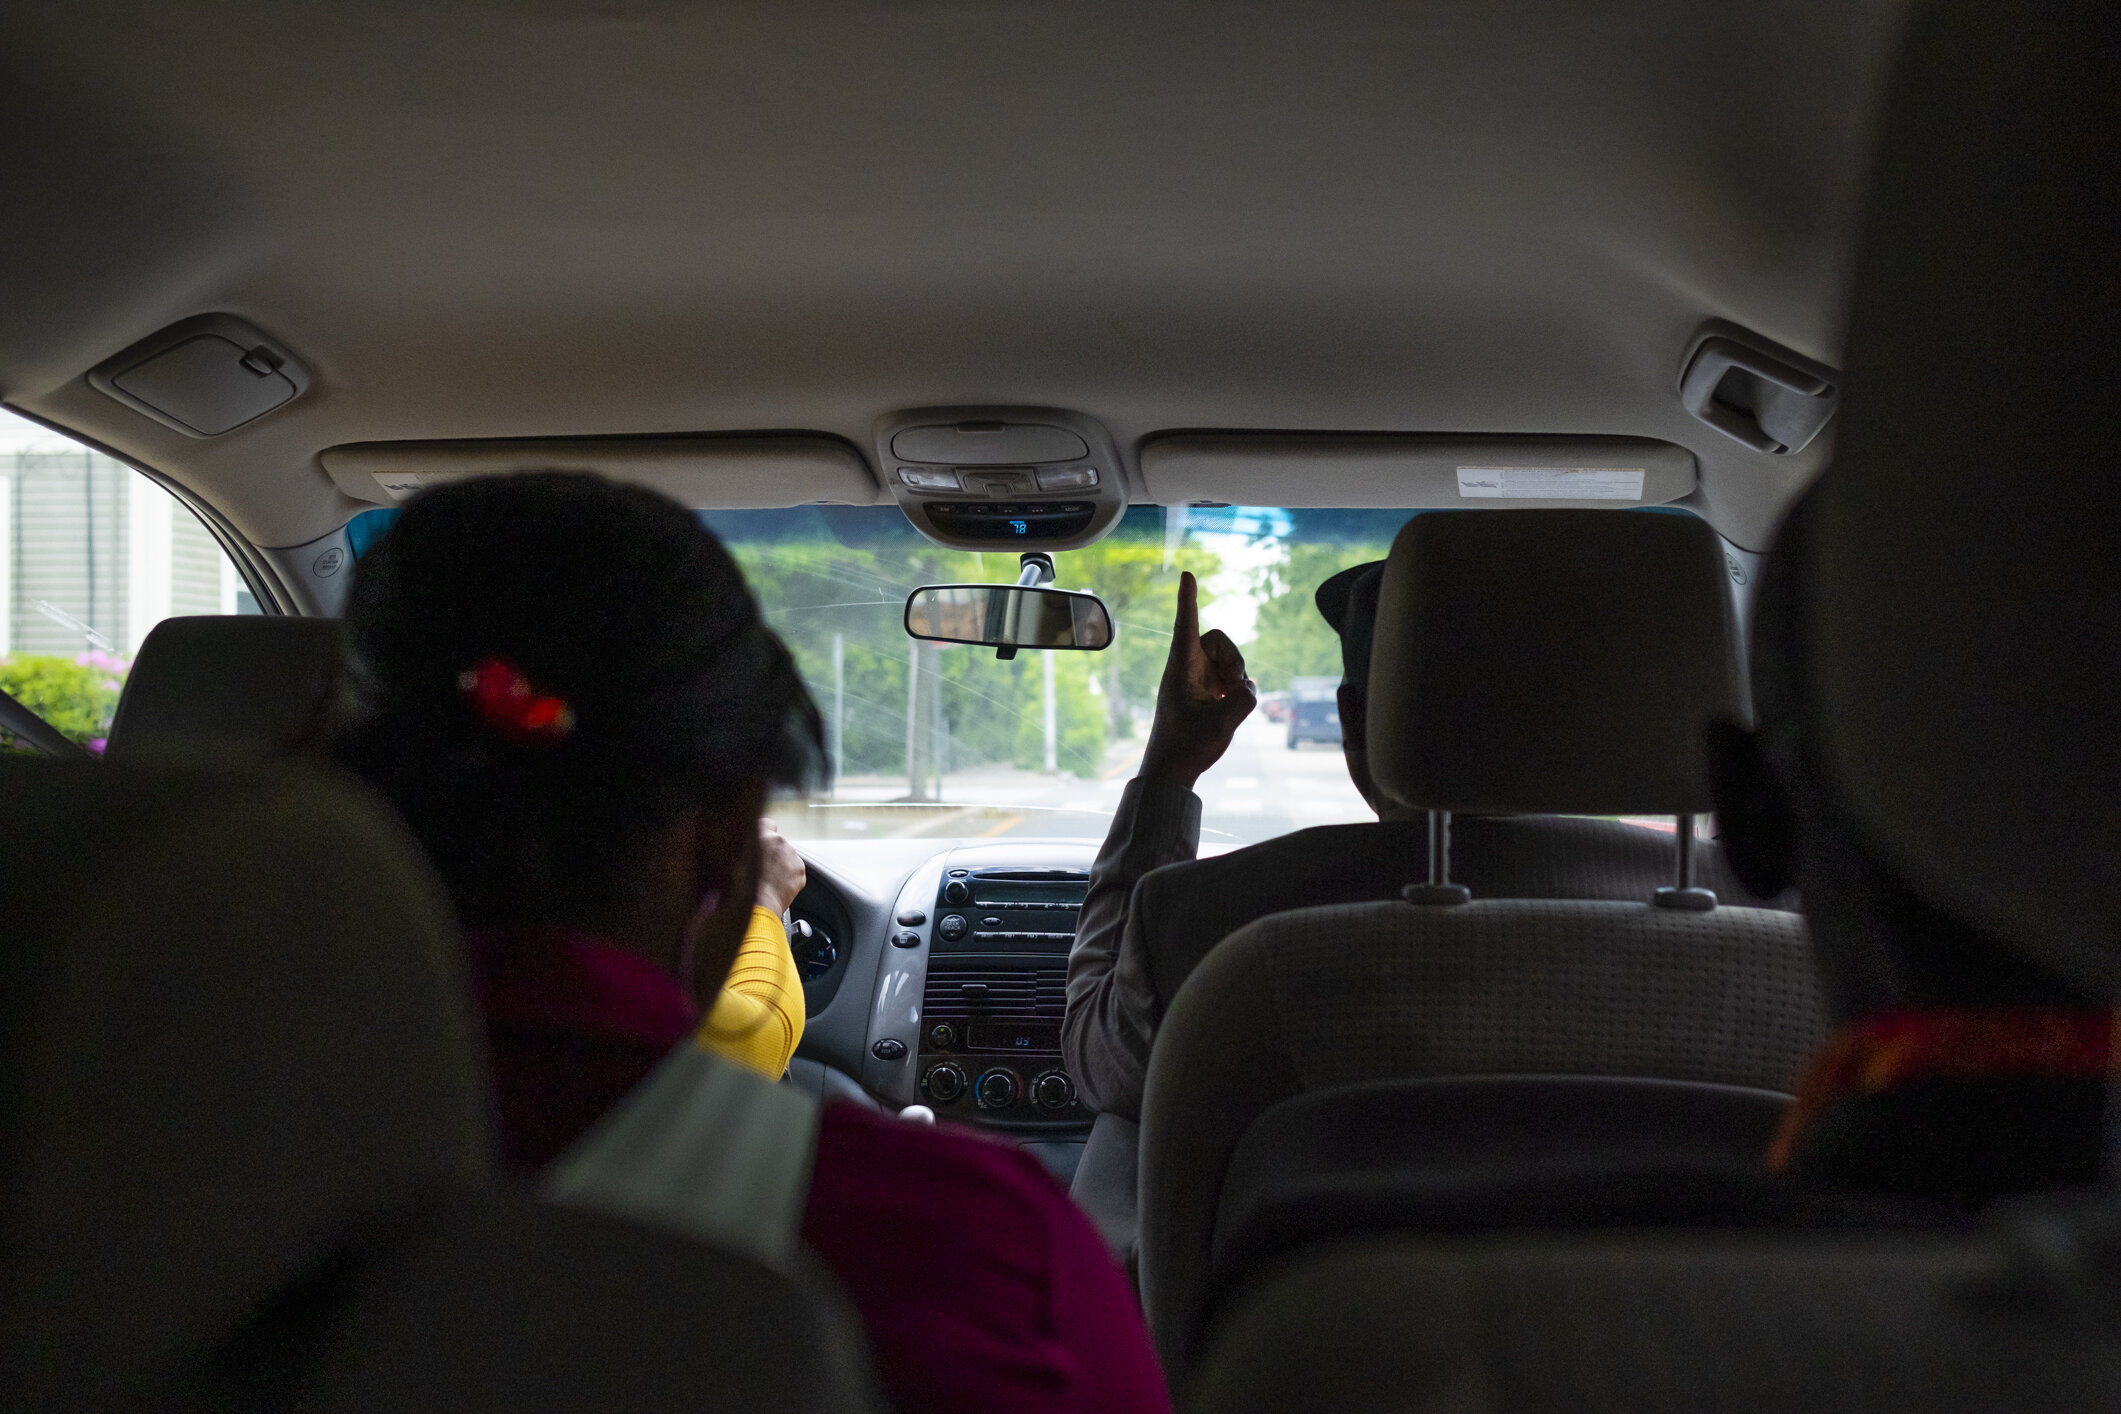  On the drive back to the RDC from the job placement facility, Amani explains that he is fluent in 12 languages.   Often, refugees seeking employment in a new country find themselves unable to attain the same profession they held in their previous co